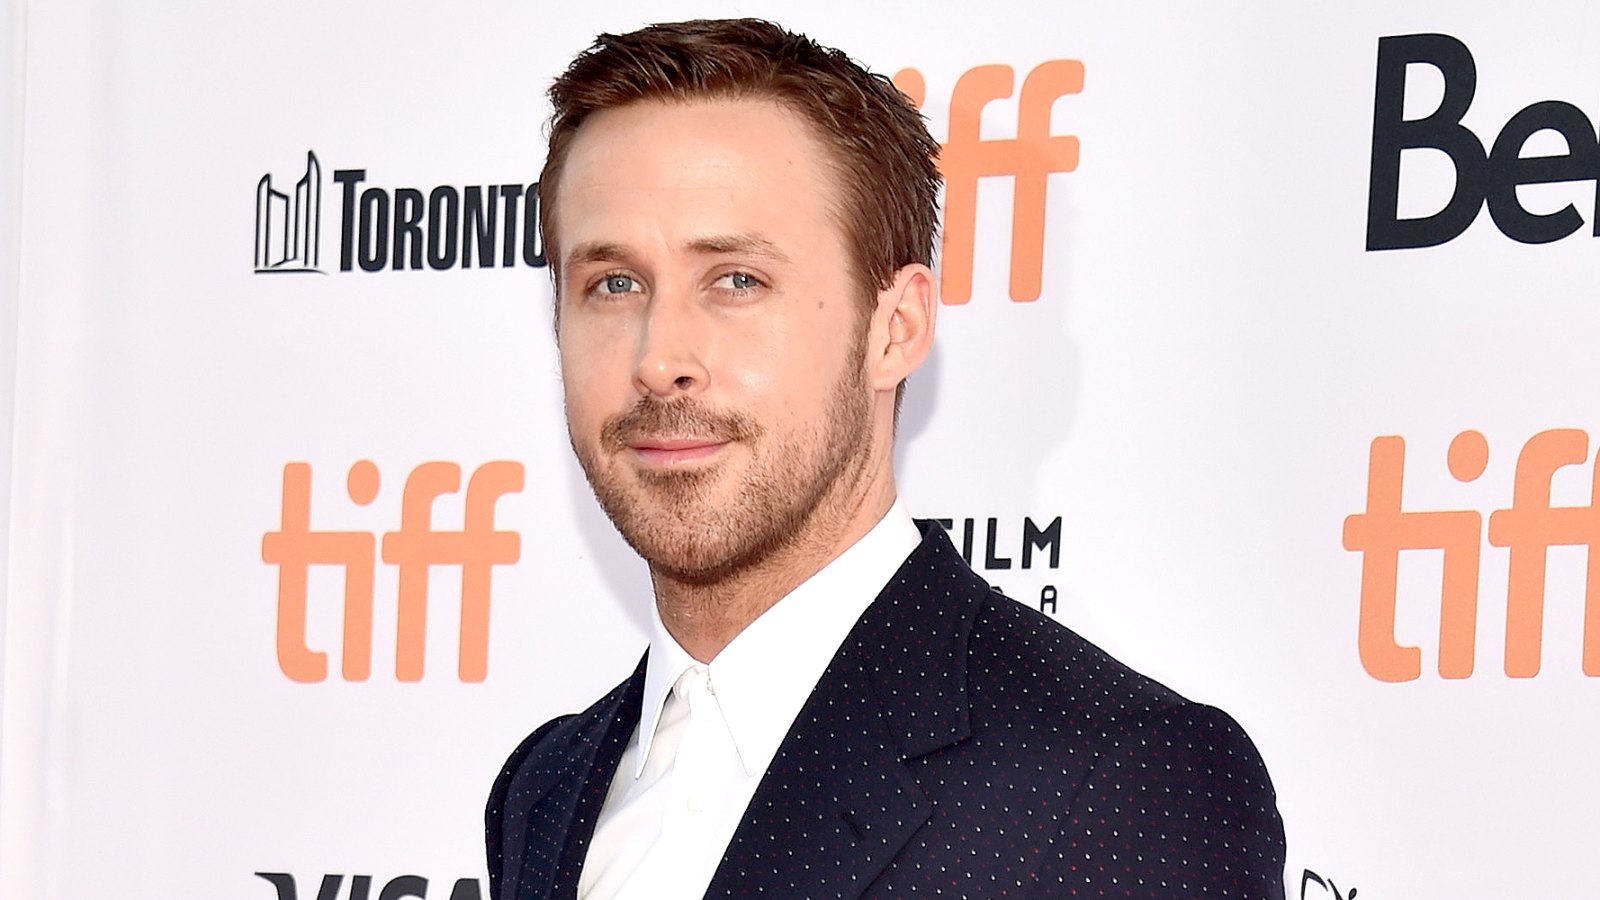 Ryan Gosling attends the "La La Land" Premiere during the 2016 Toronto International Film Festival at Princess of Wales Theatre on September 12, 2016 in Toronto, Canada.